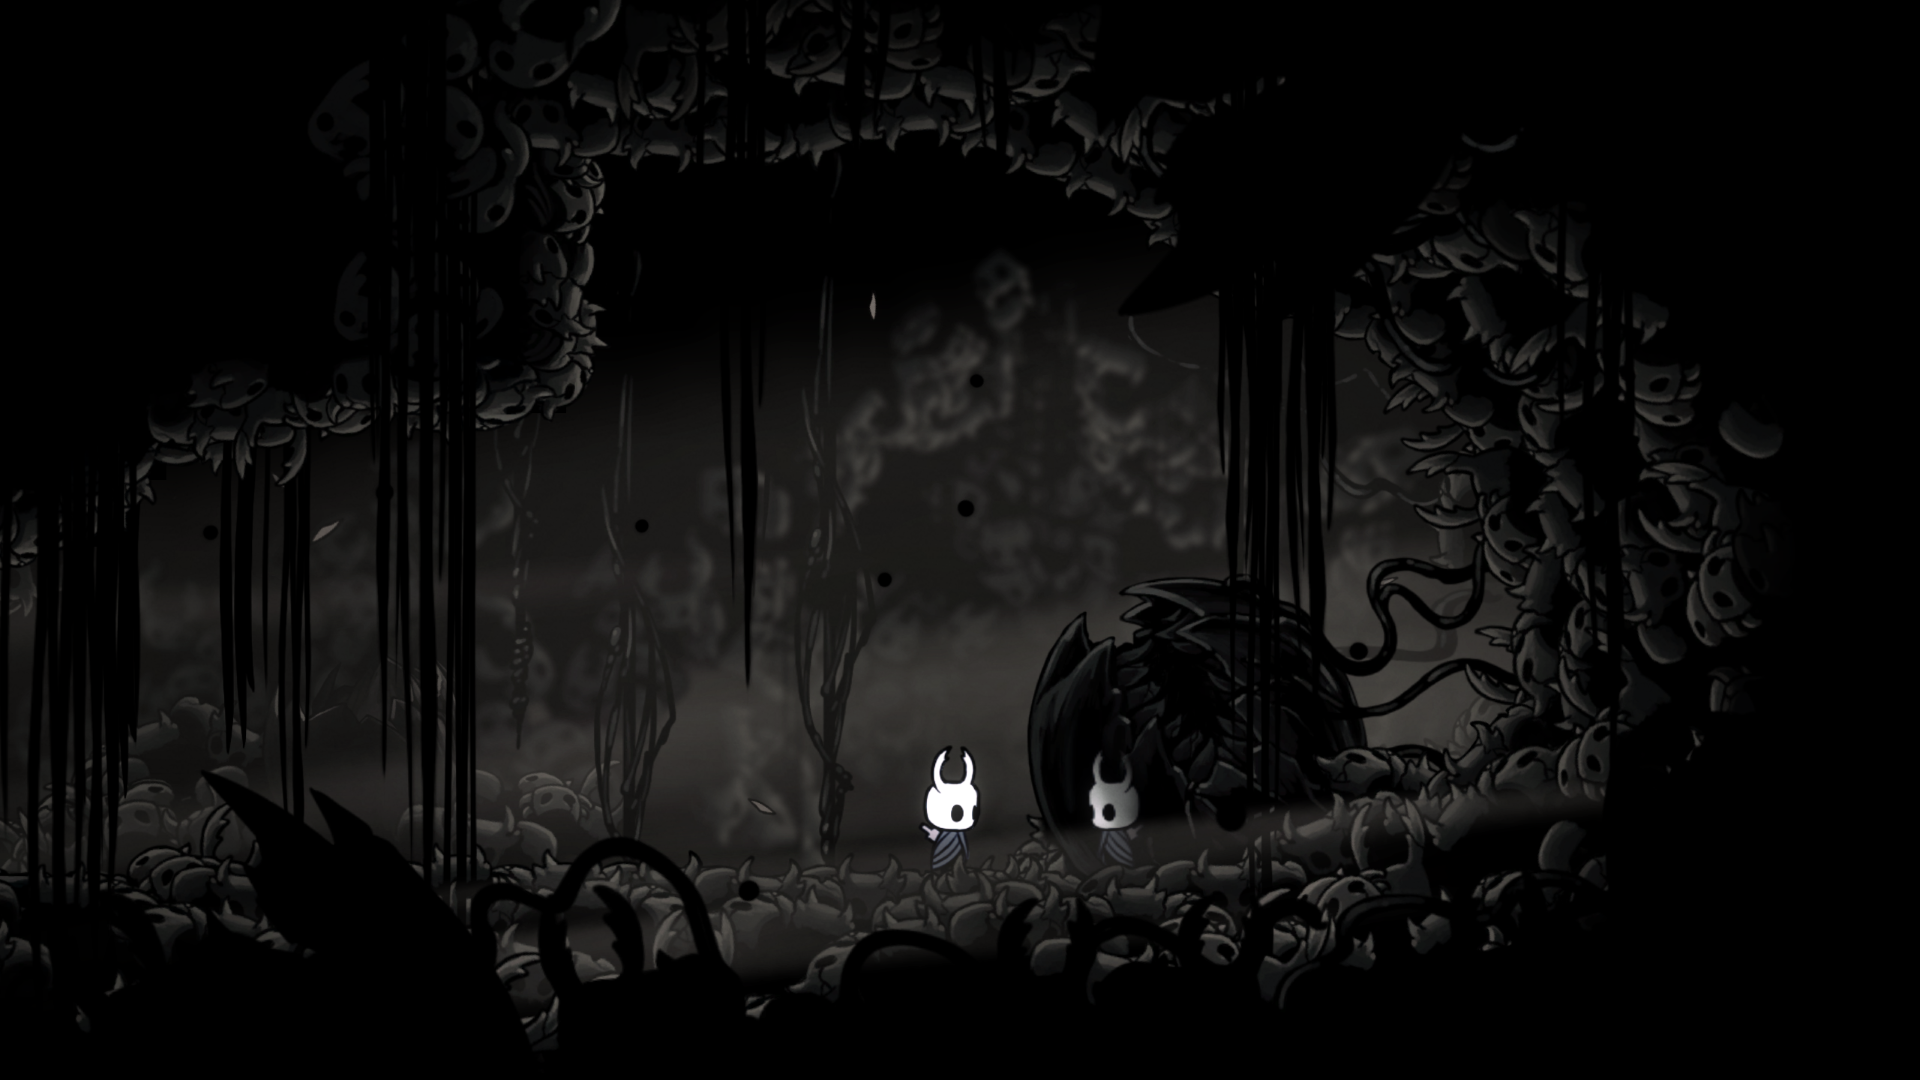 the hollow knight the hollow knight wallpaper